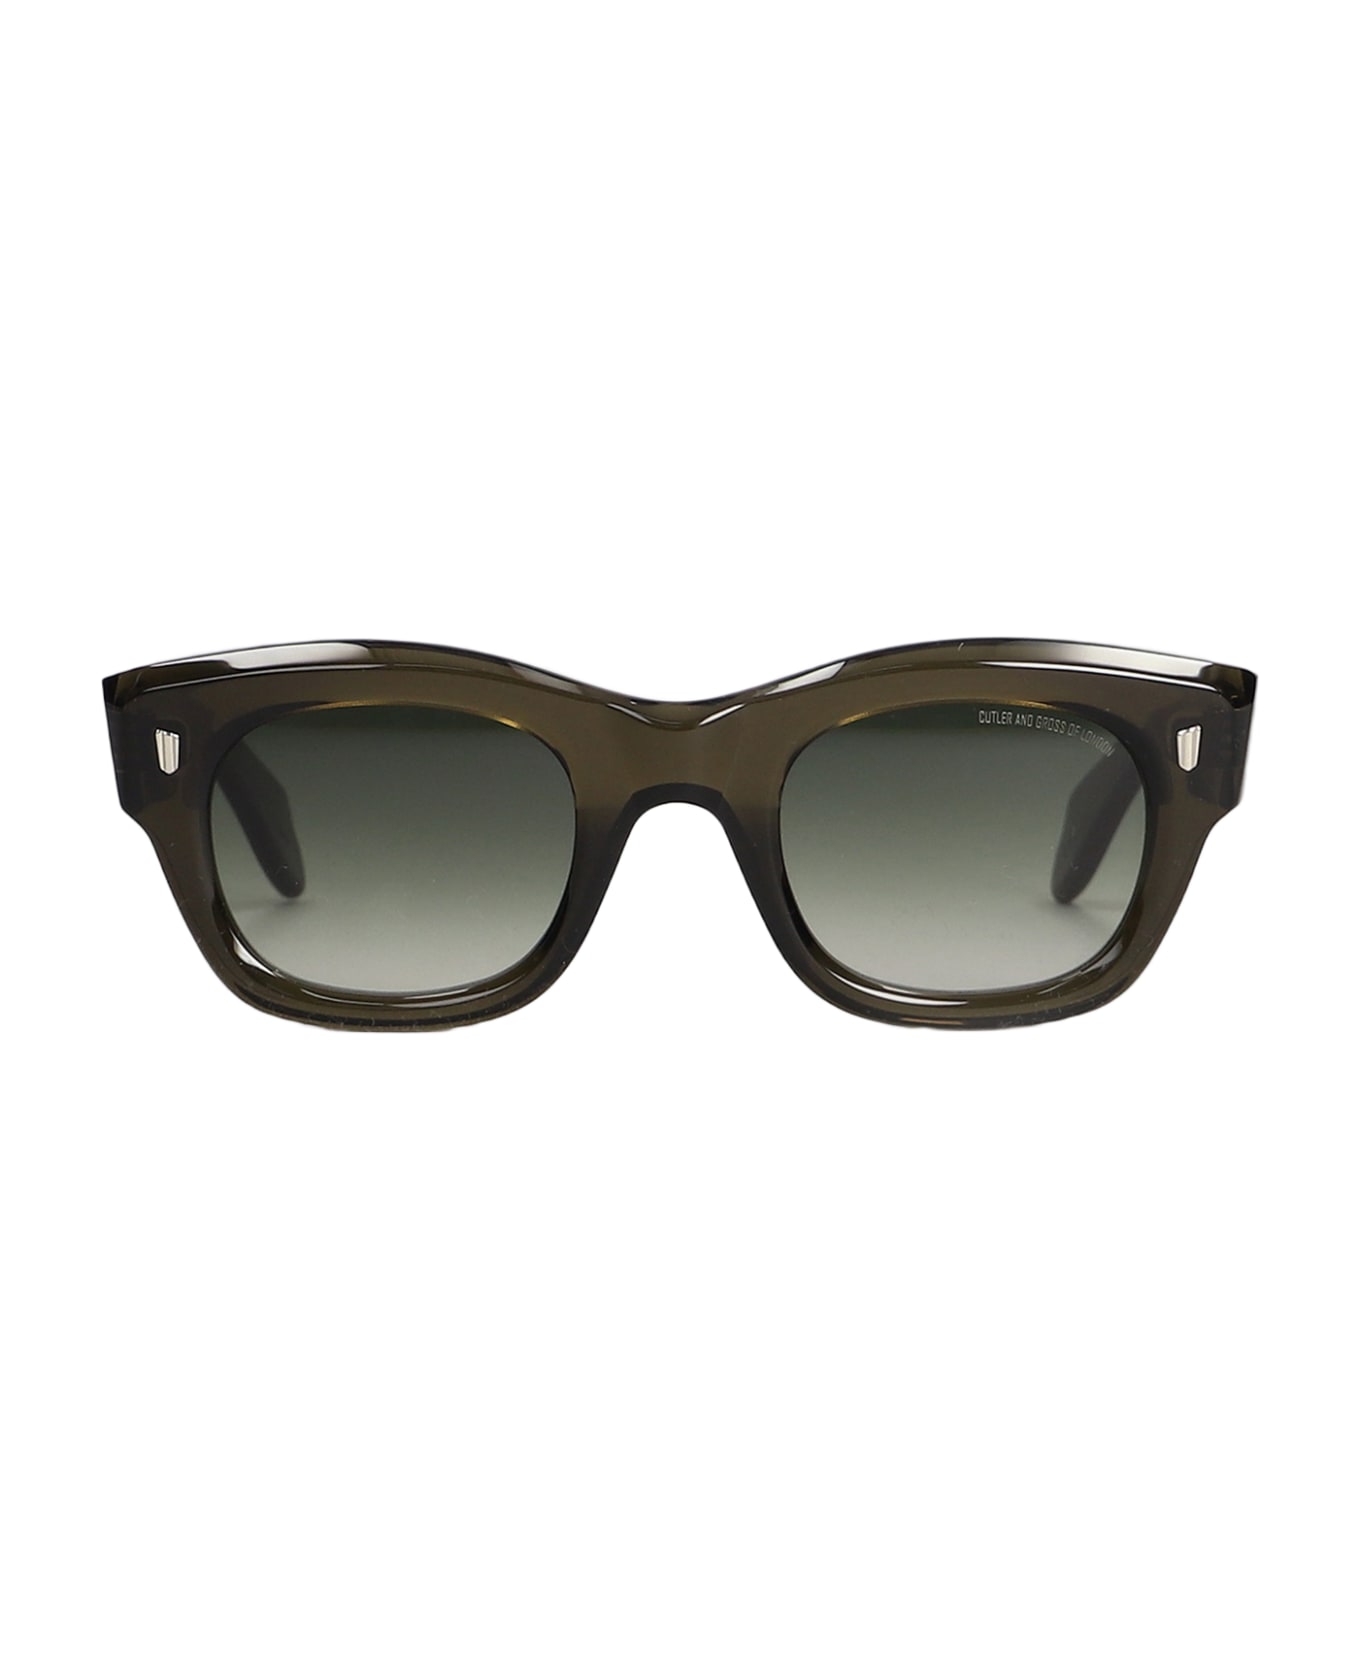 Cutler and Gross 9261 Sunglasses In Green Acetate - green